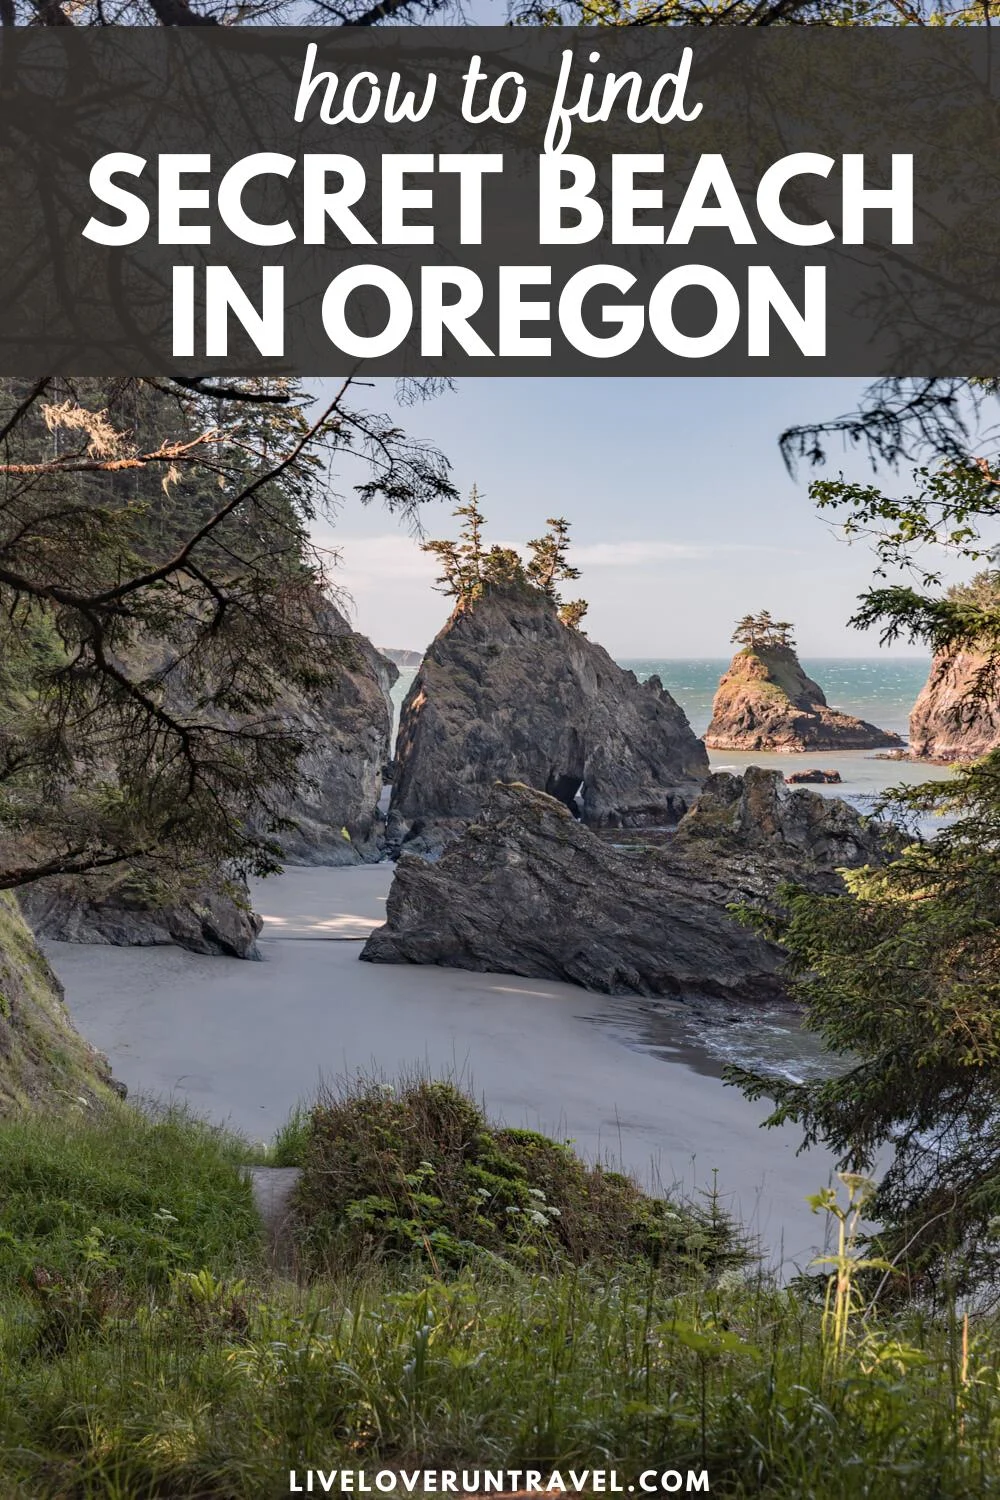 Oregon: Discover Beauty Along a Coast that is Open to Everyone